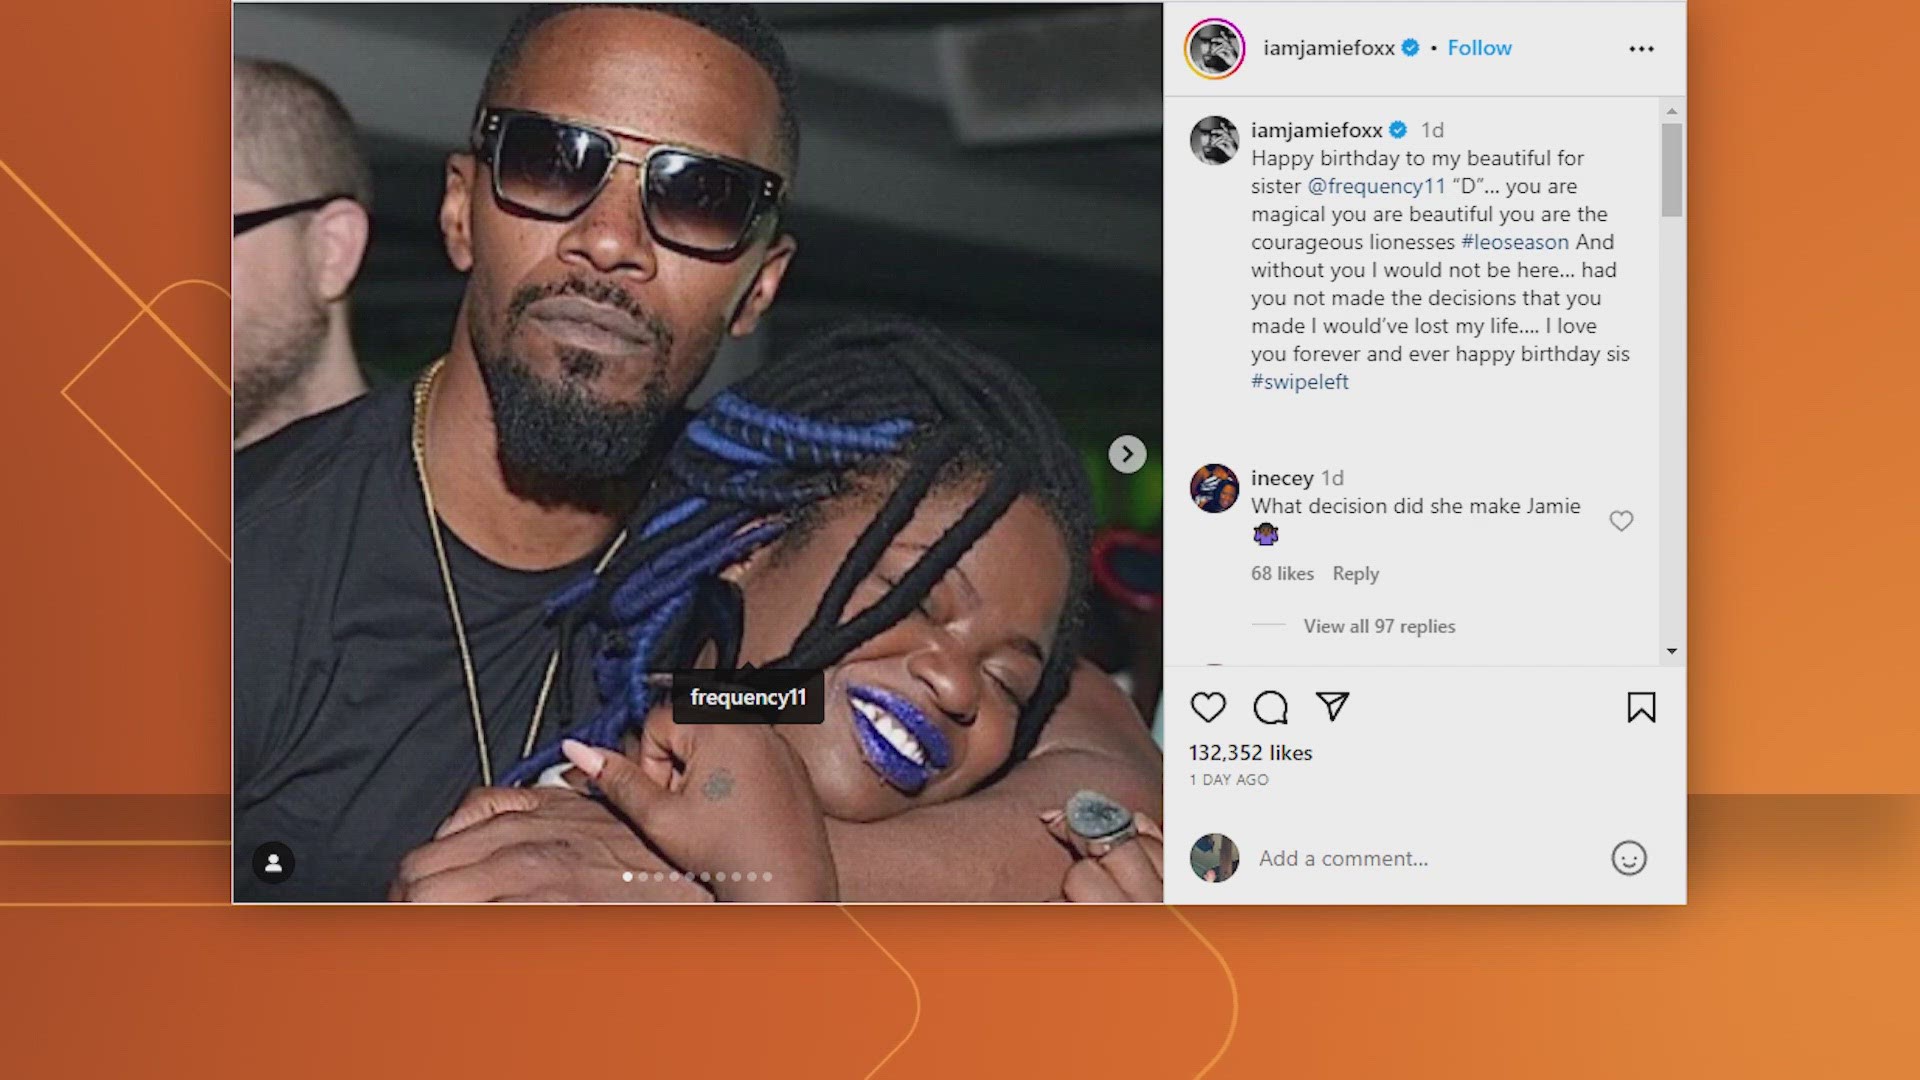 Jamie Foxx honored his sister on her birthday, thanking her for saving his life.